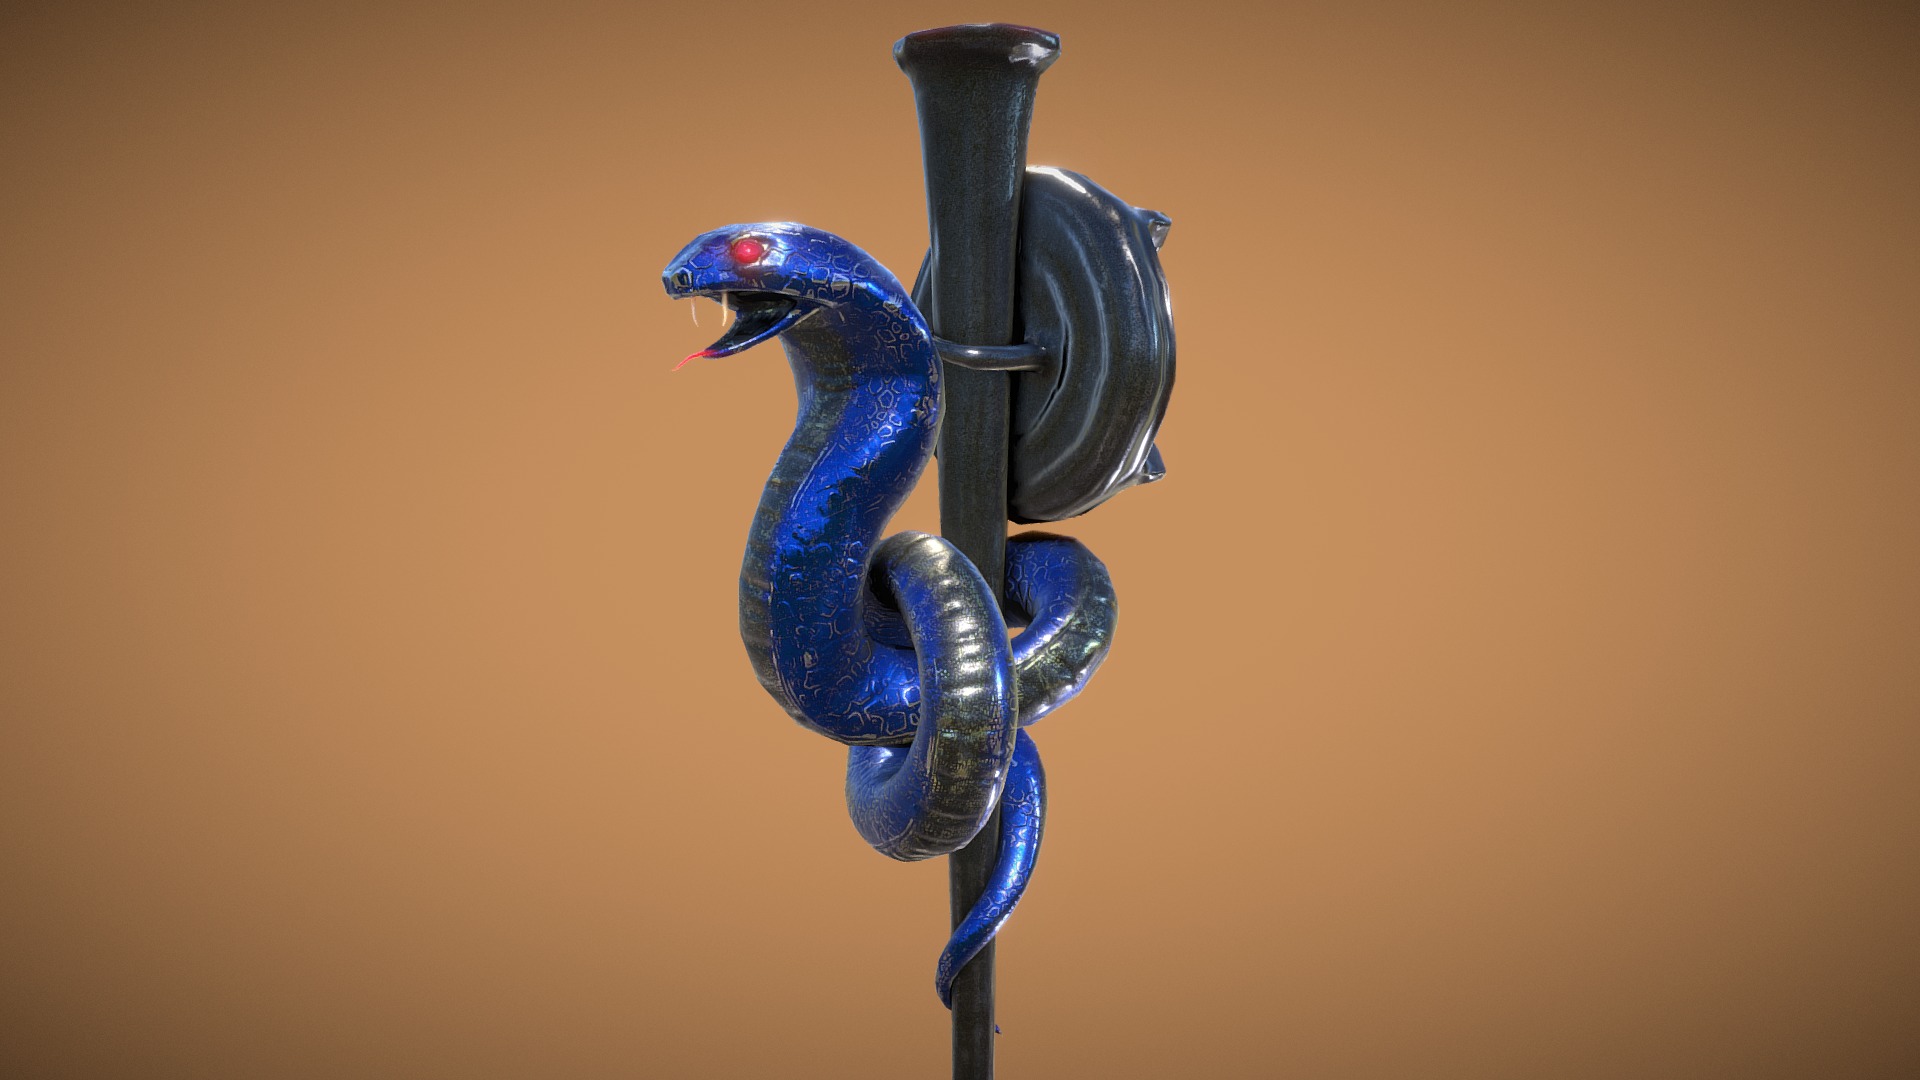 3D model Cobra Torch - This is a 3D model of the Cobra Torch. The 3D model is about a blue lizard on a metal rod.